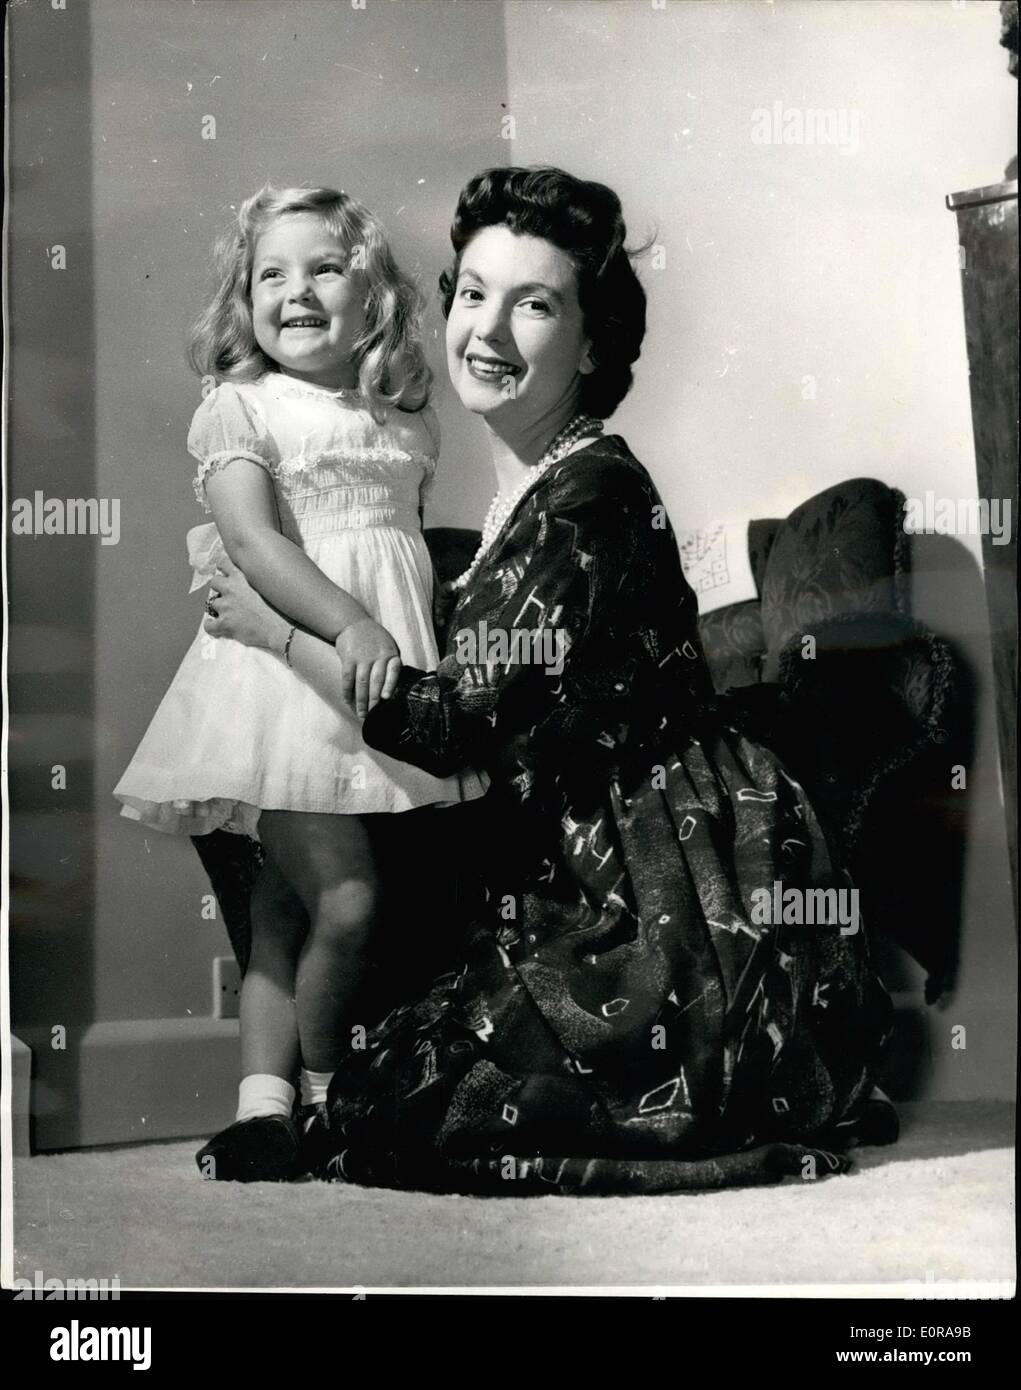 Nov. 11, 1958 - Sylvia Peters to Leave the B.B.C... She Wants to Spend More Time With Her Daughter. Britain's best known woman TV announcer Sylvia Peters announced yesterday that she is leaving the B.B.C. and giving up her career so that she can become a housewife and mother to her three year old daughter Carmella... Sylvia, who is 32 - first appeared before the TV cameras in 1947 and since then has announced more than 7,500 programmes Stock Photo